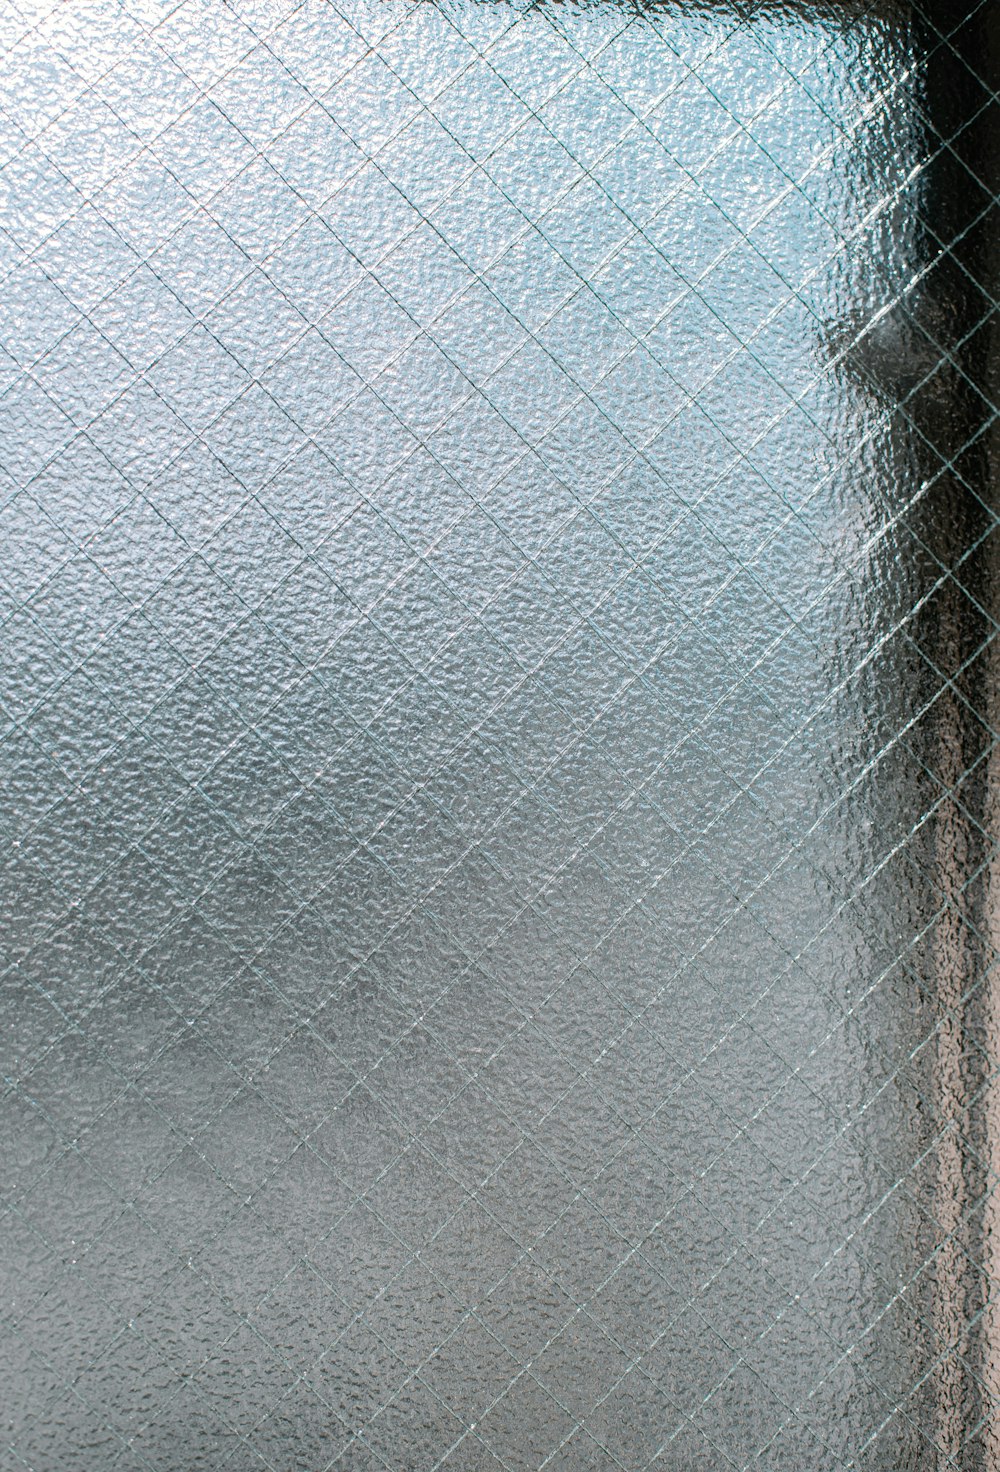 Frosted Glass Pictures | Download Free Images on Unsplash